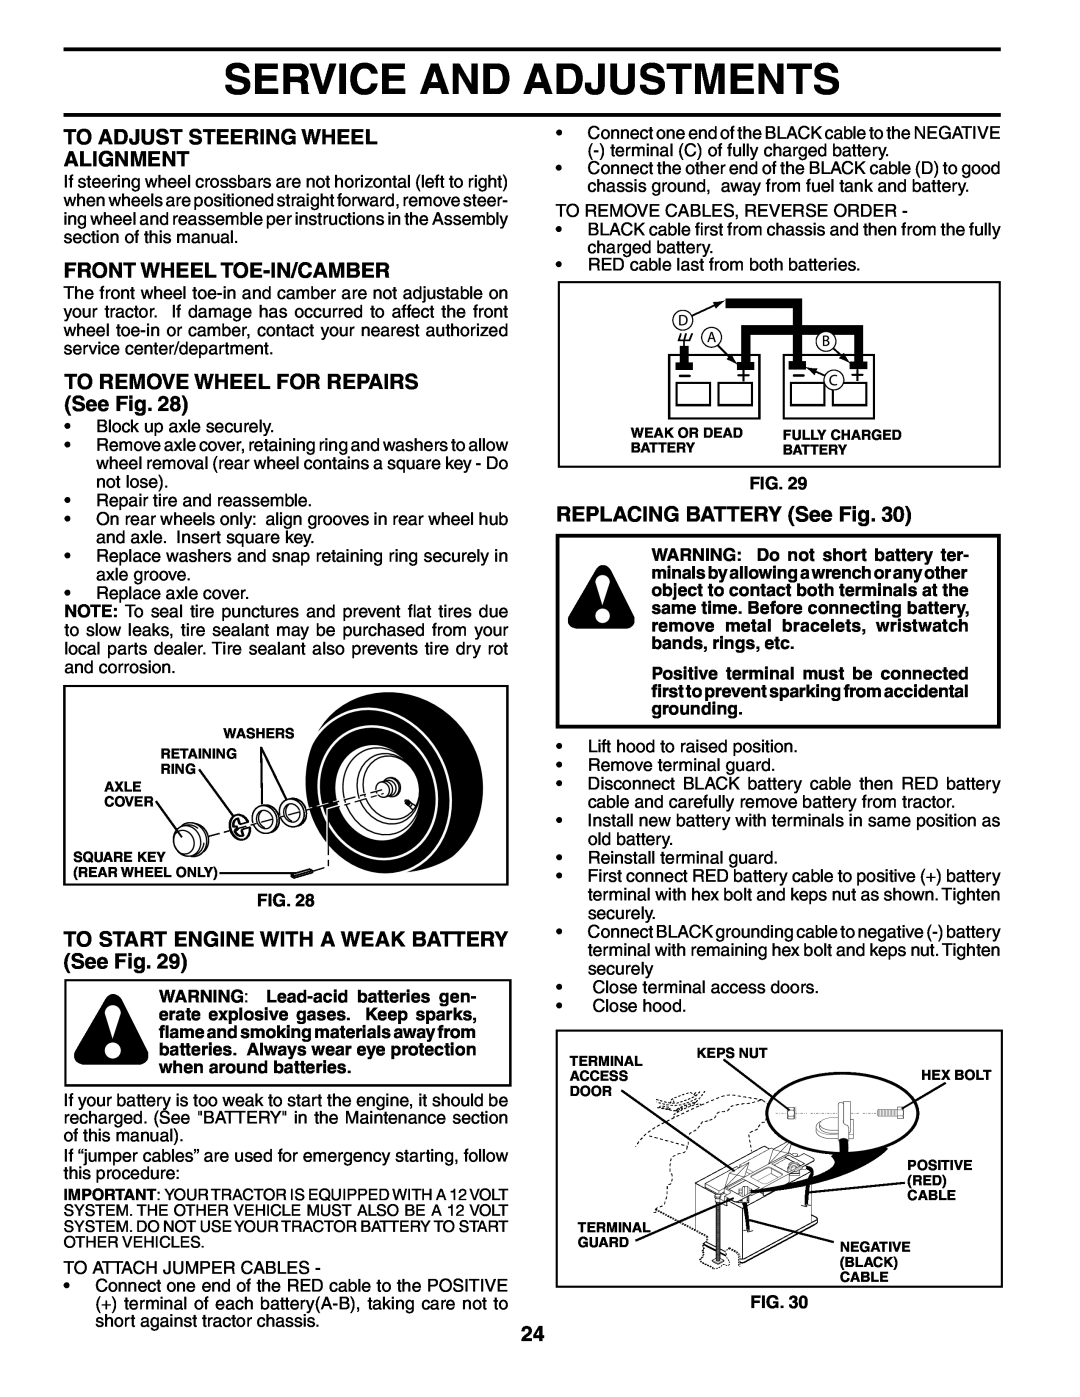 Poulan 954569455 manual To Adjust Steering Wheel Alignment, Front Wheel Toe-In/Camber, TO REMOVE WHEEL FOR REPAIRS See Fig 